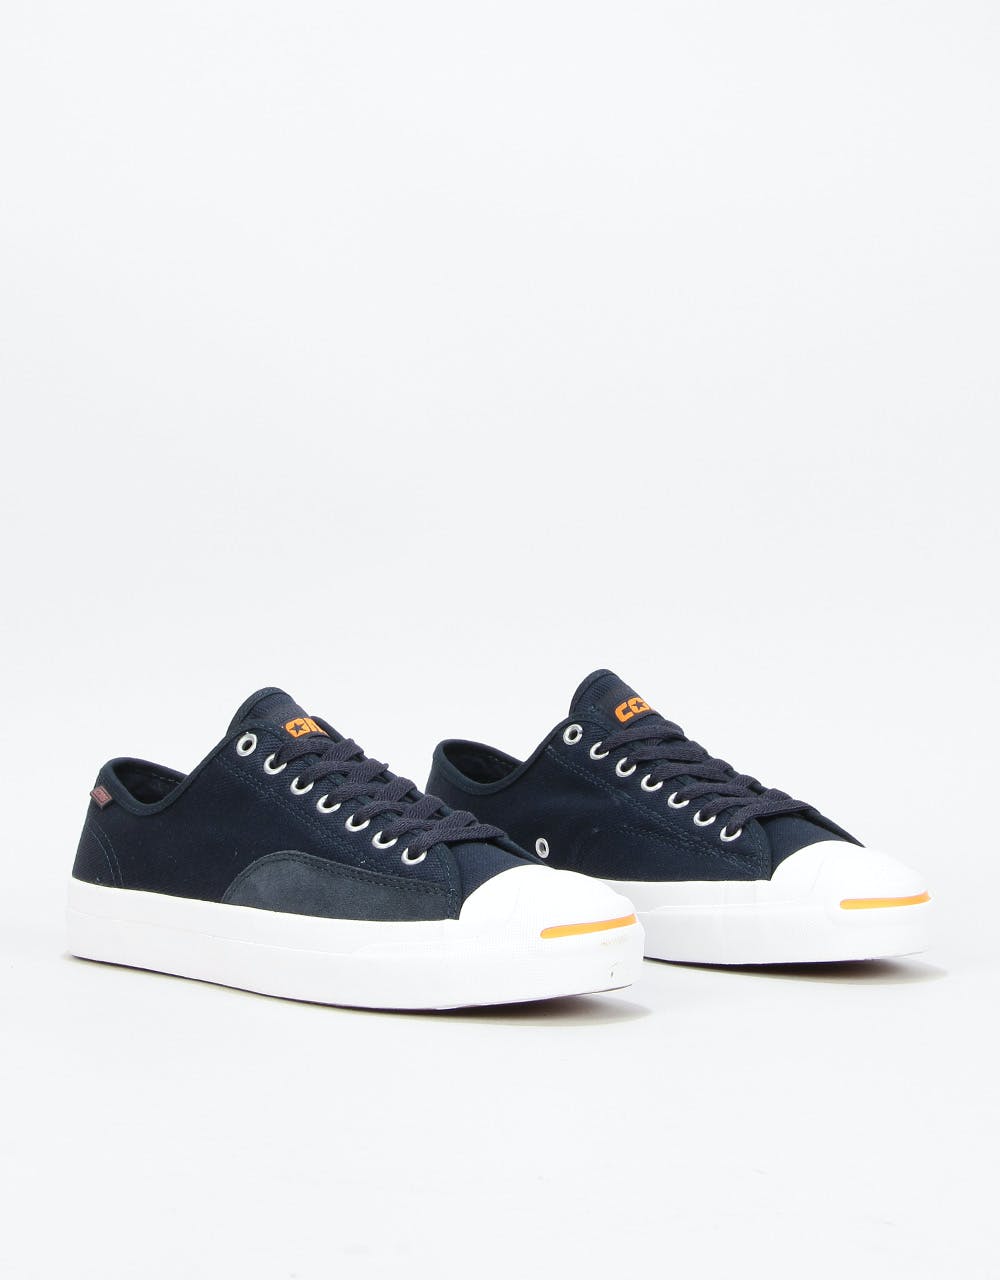 Converse Jack Purcell Pro Ox Skate Shoes - Dark Obsidian/White